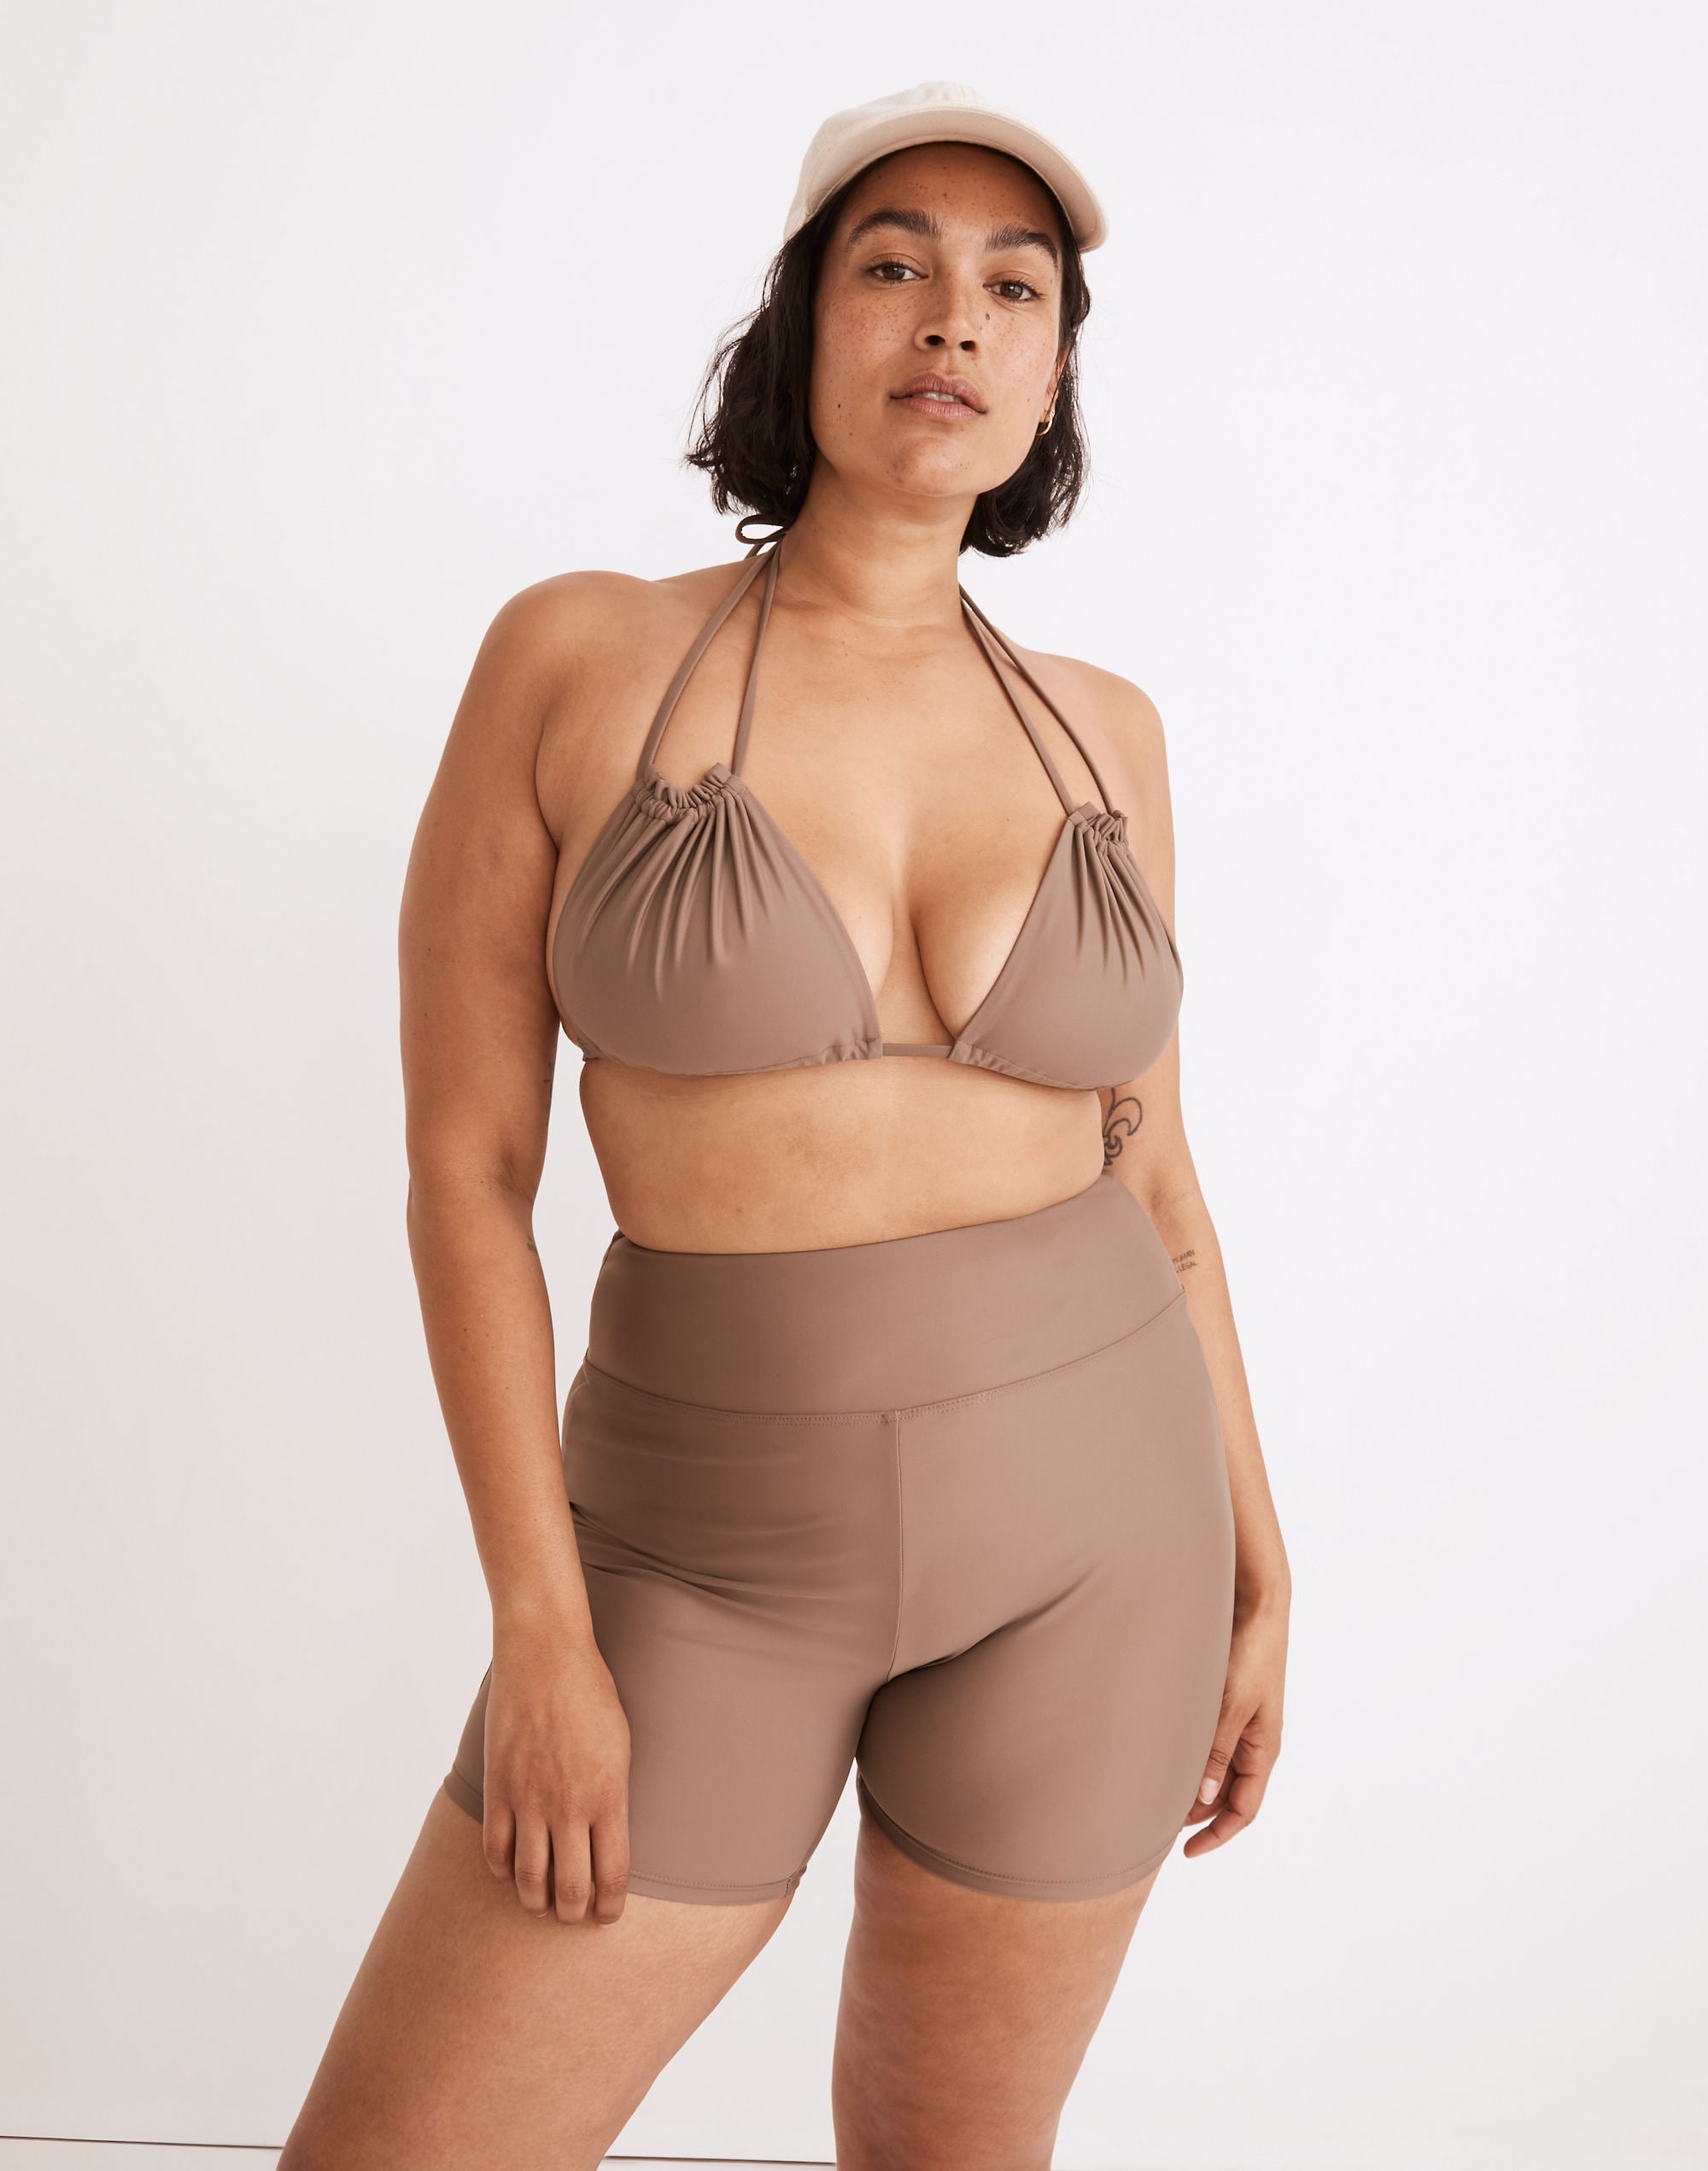 Madewell Second Wave Ruched String Bikini Top